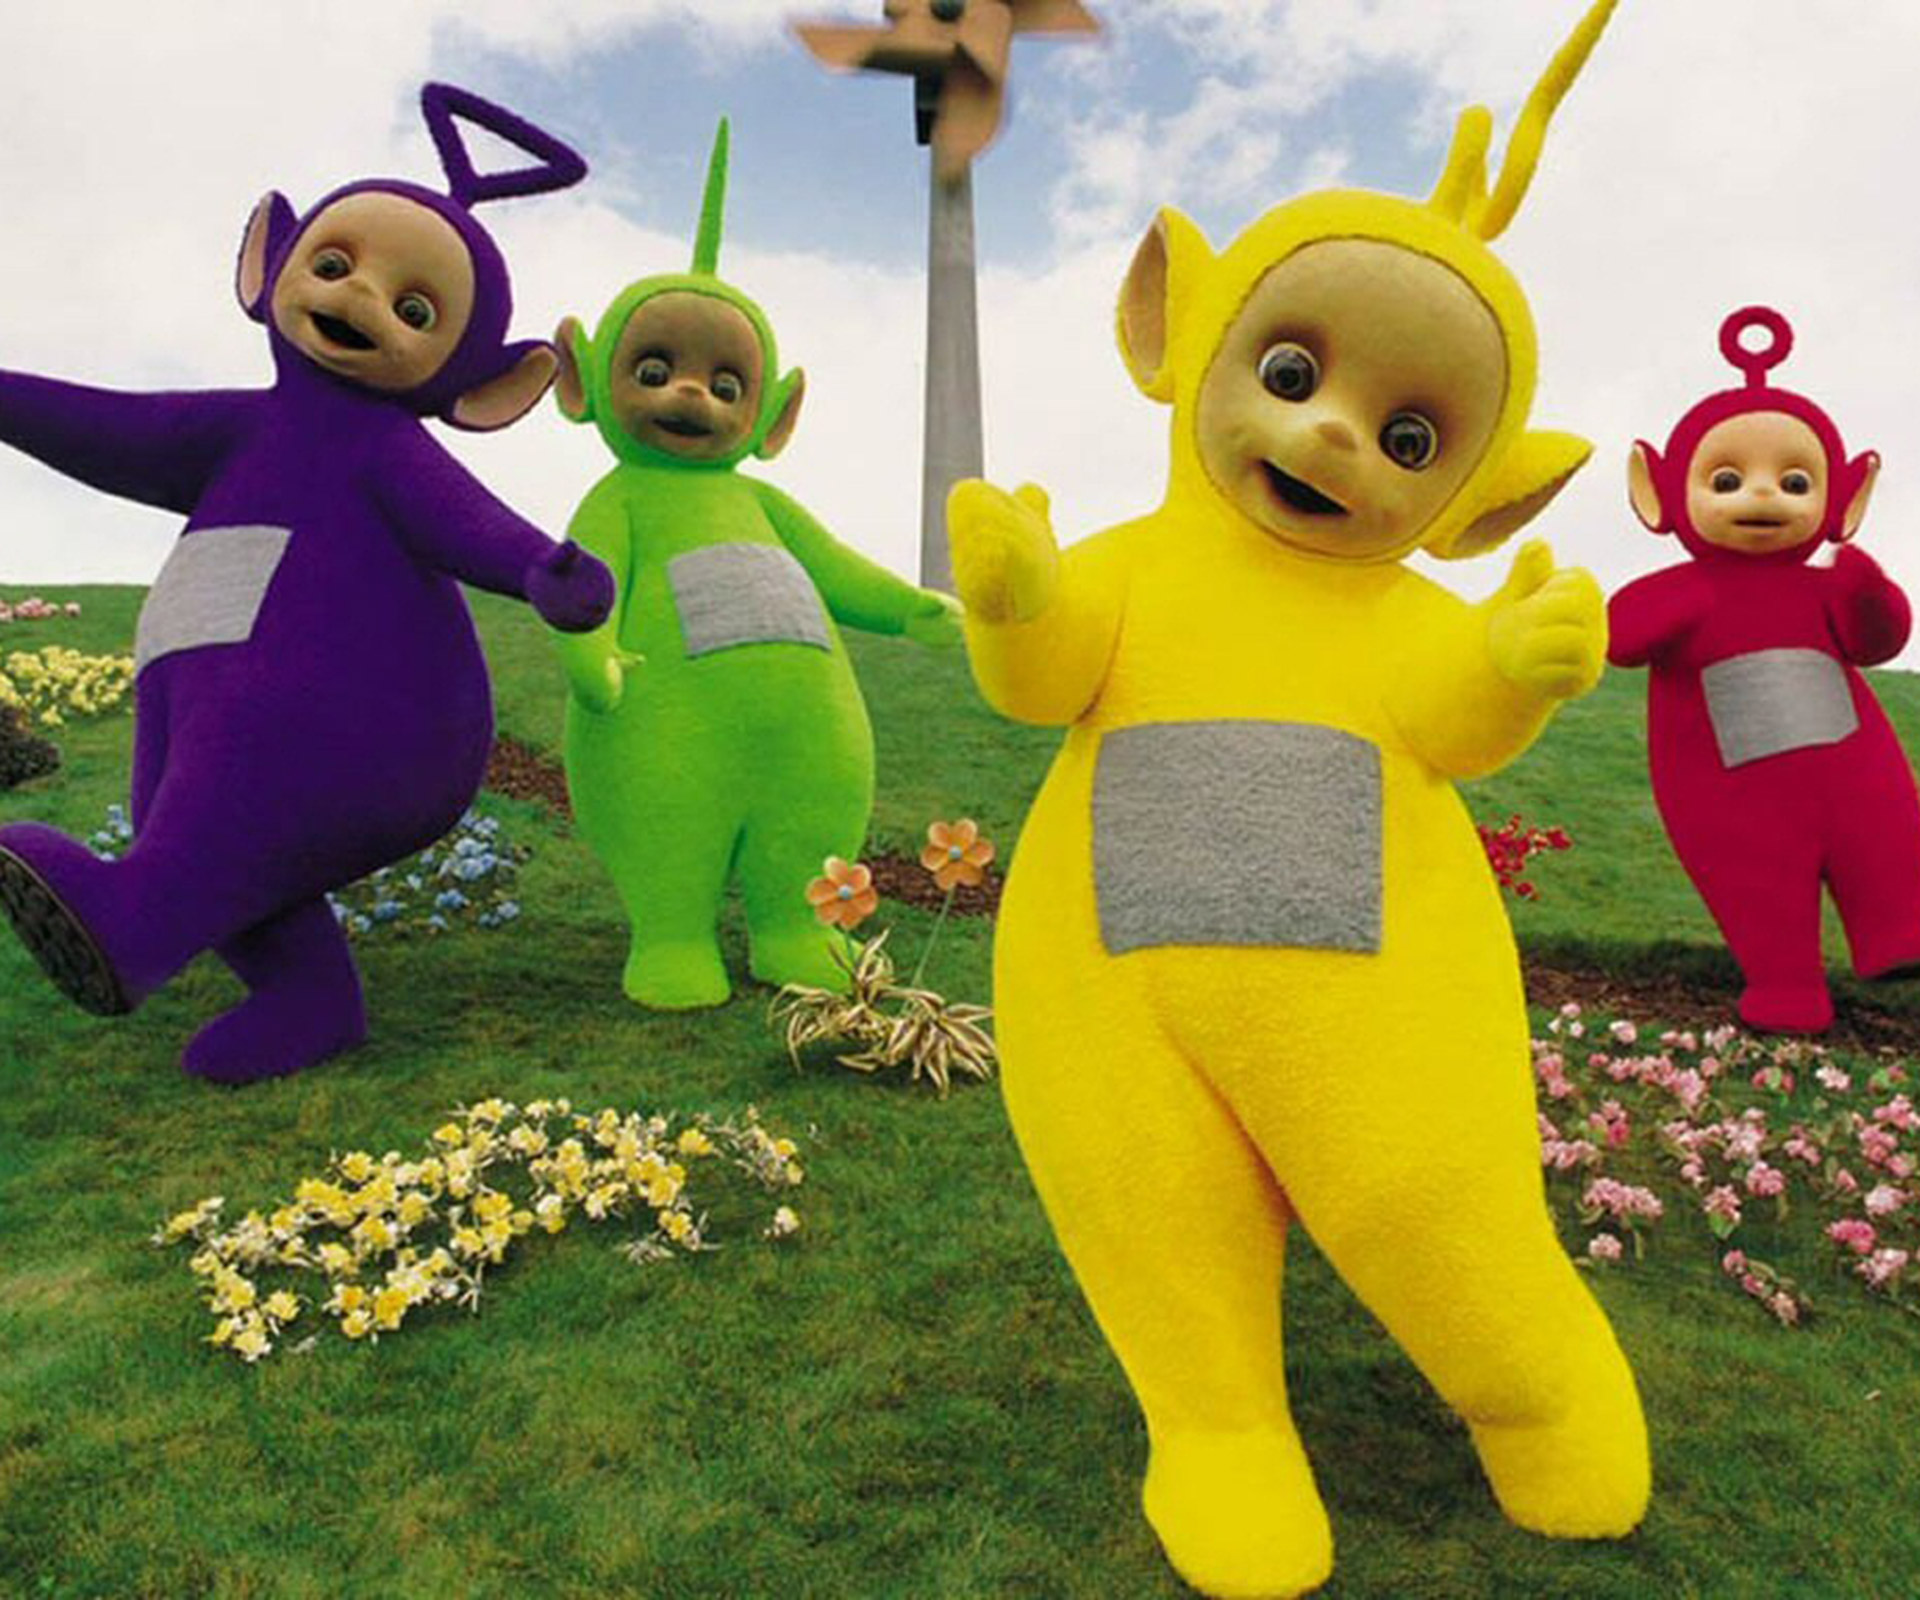 The Teletubbies’ babies are here to give you all nightmares